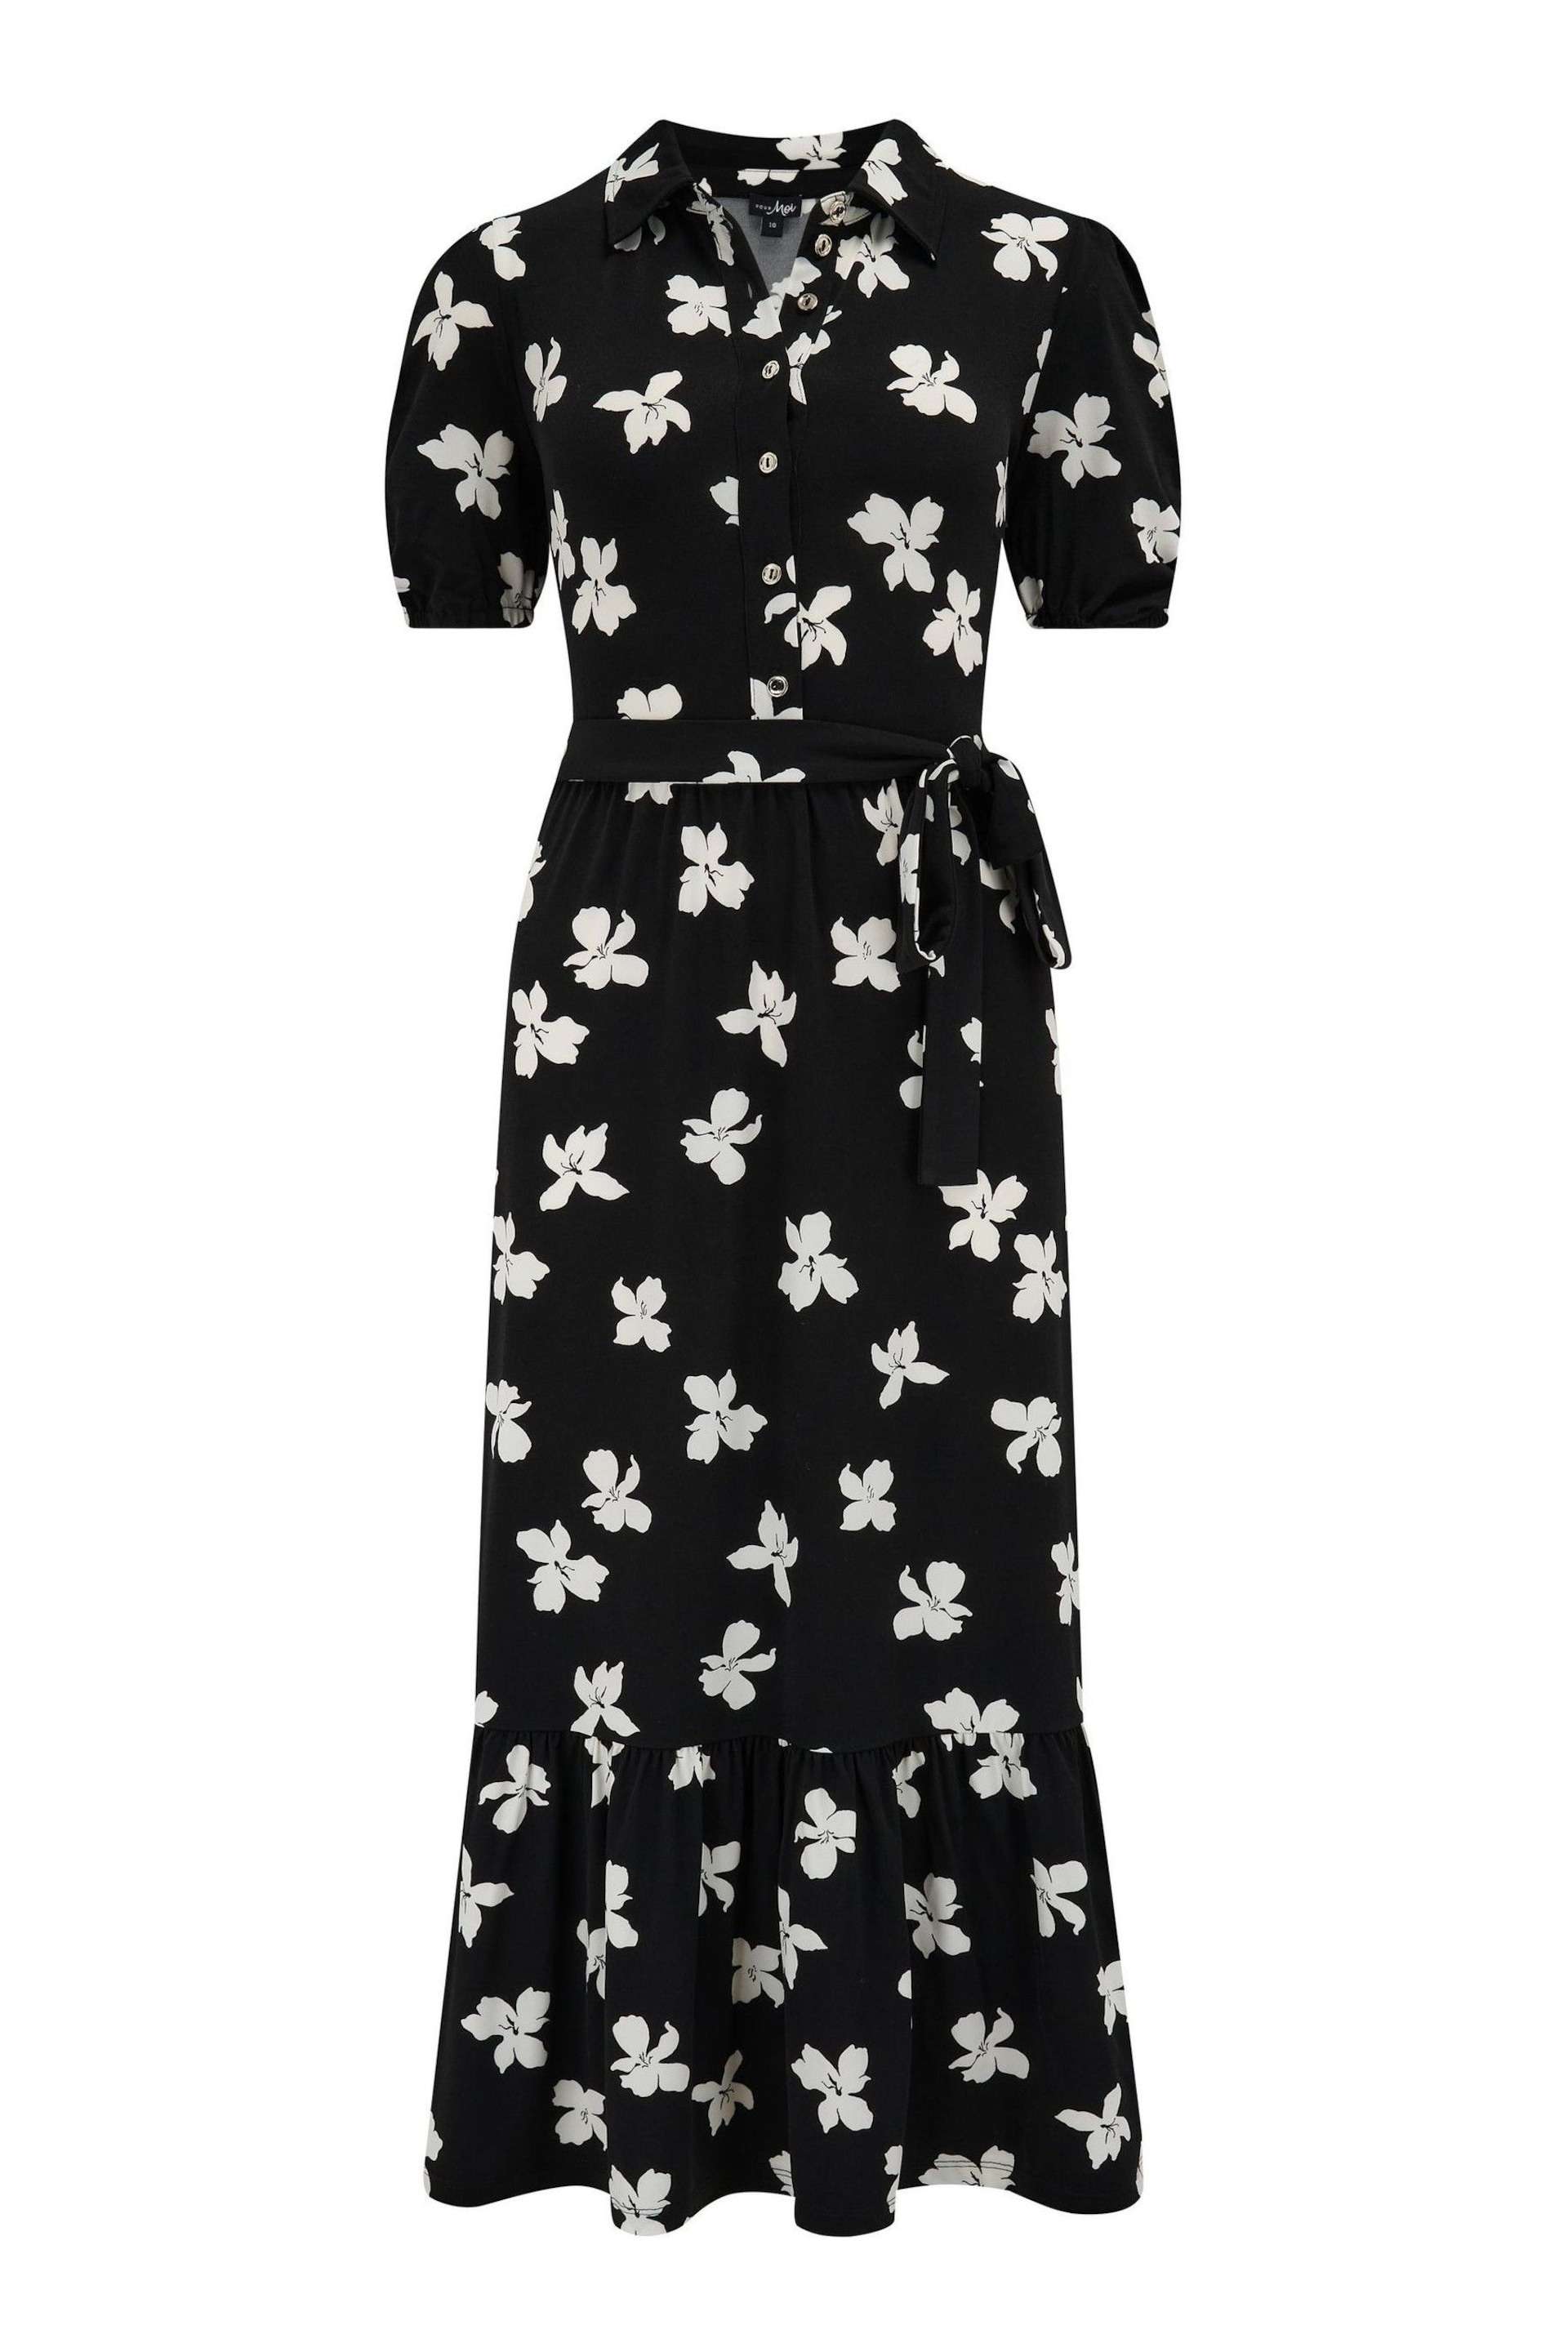 Pour Moi Black & White Jodie Fuller Bust Slinky Jersey Tiered Midi Shirt Dress - Image 3 of 4